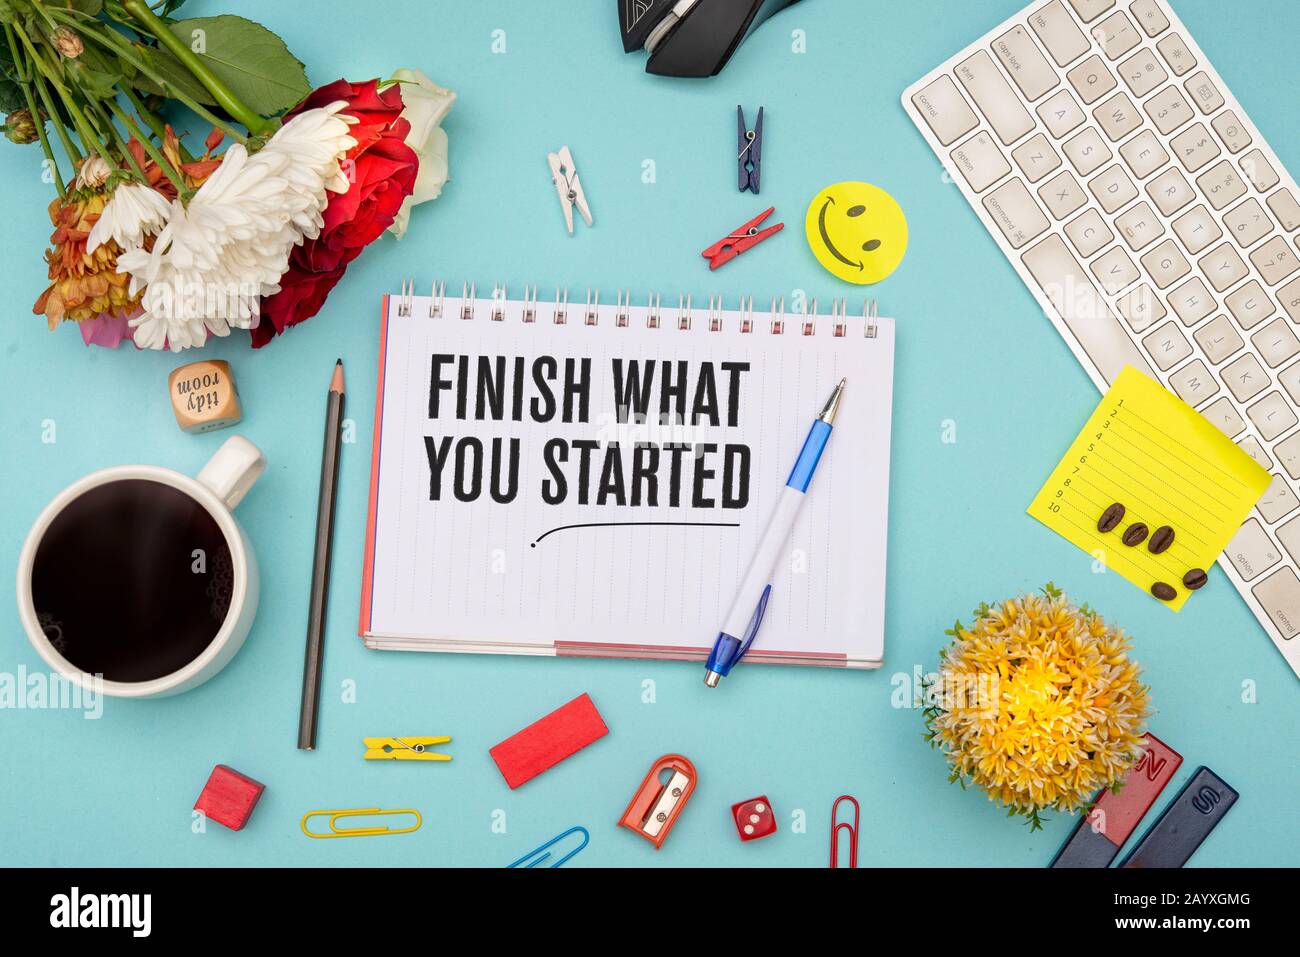 Finish what you started quote with office stationery items Stock Photo